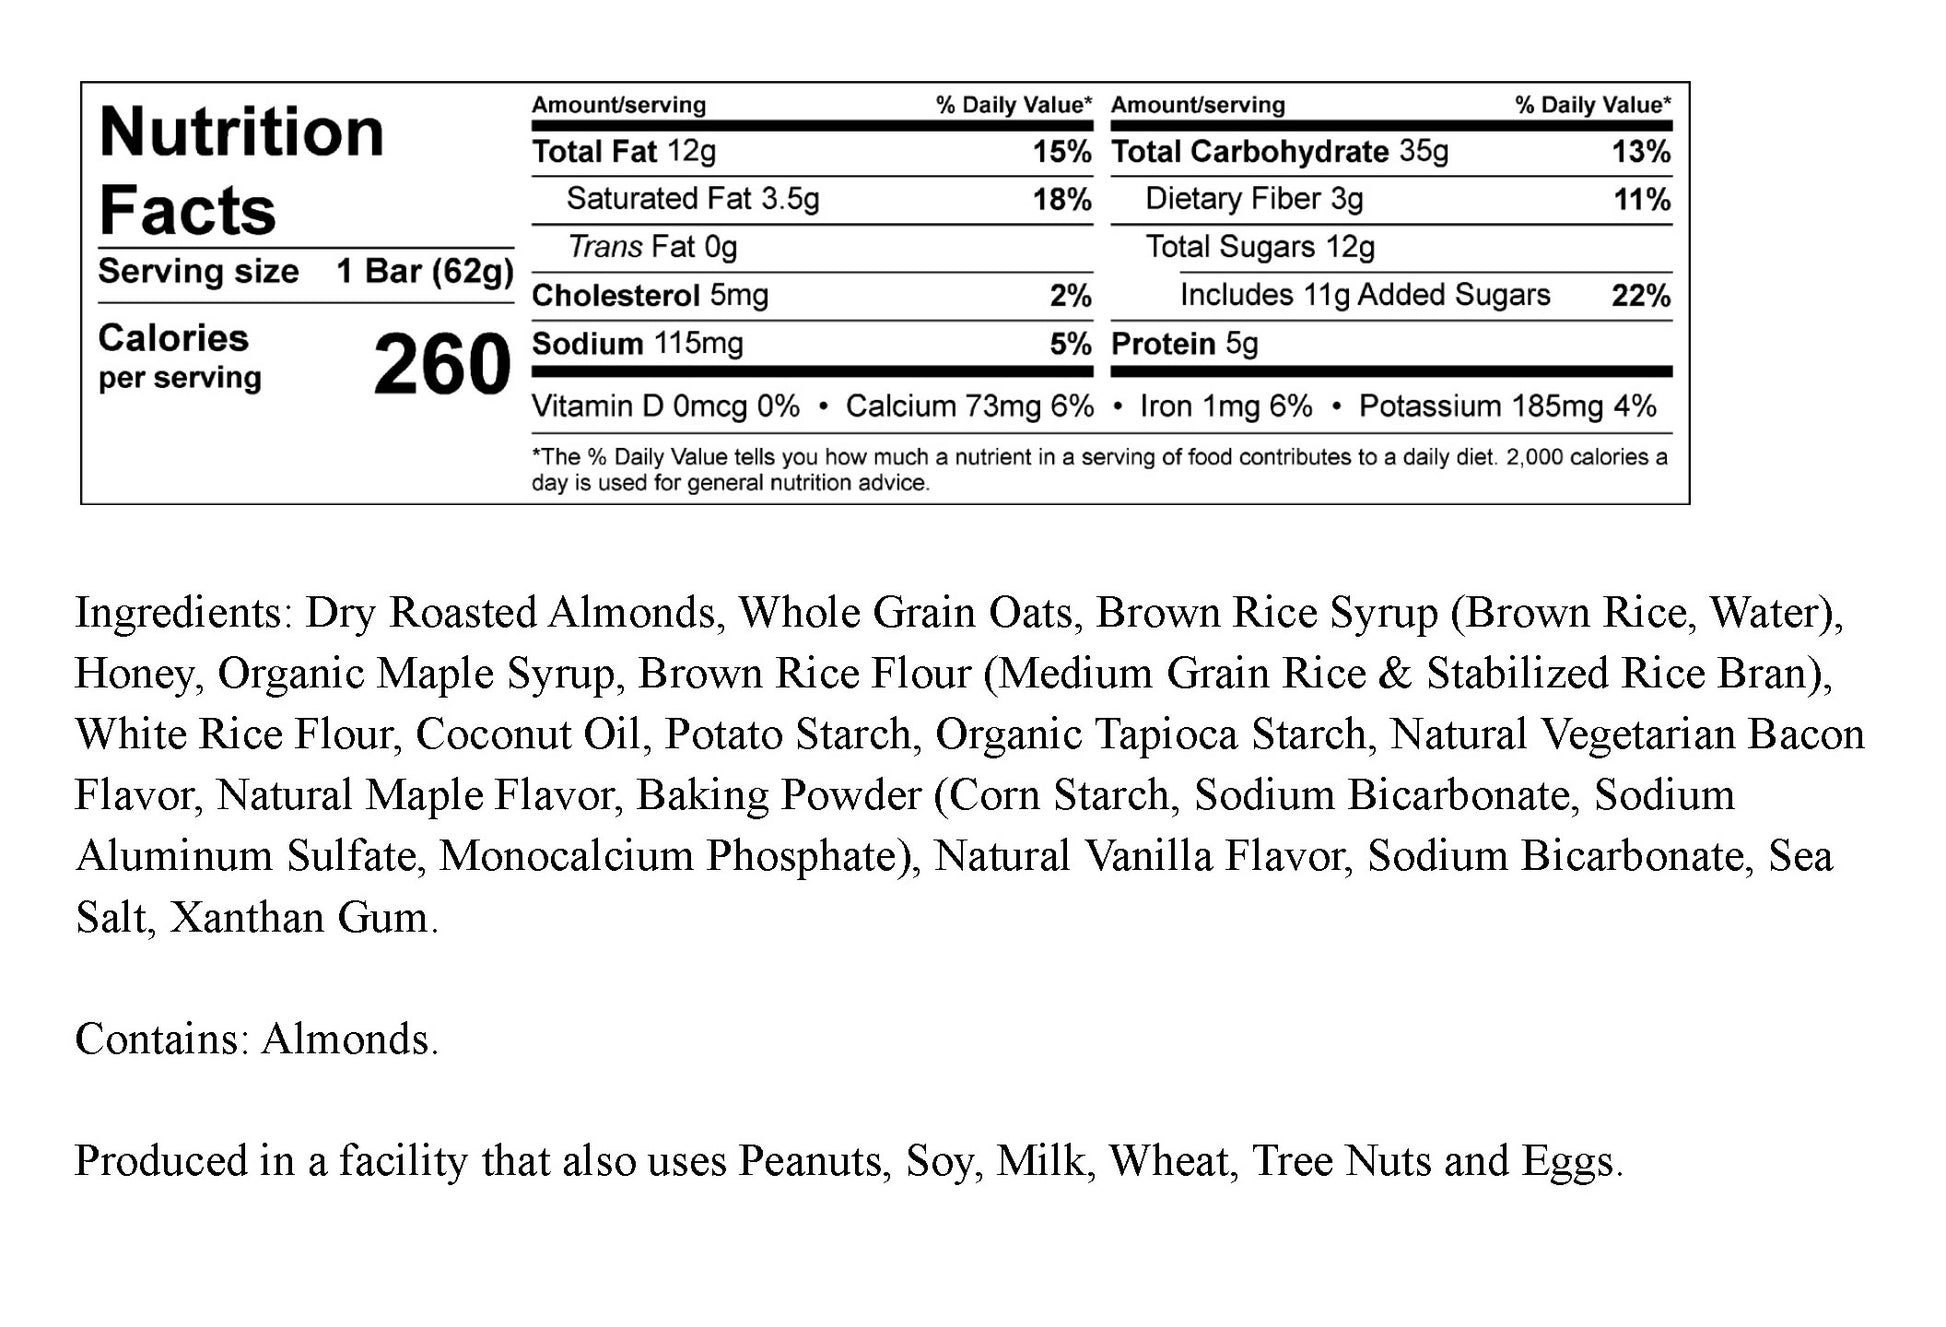 JoJé Pancakes and Bacon Bar Nutrition Facts and Ingredients